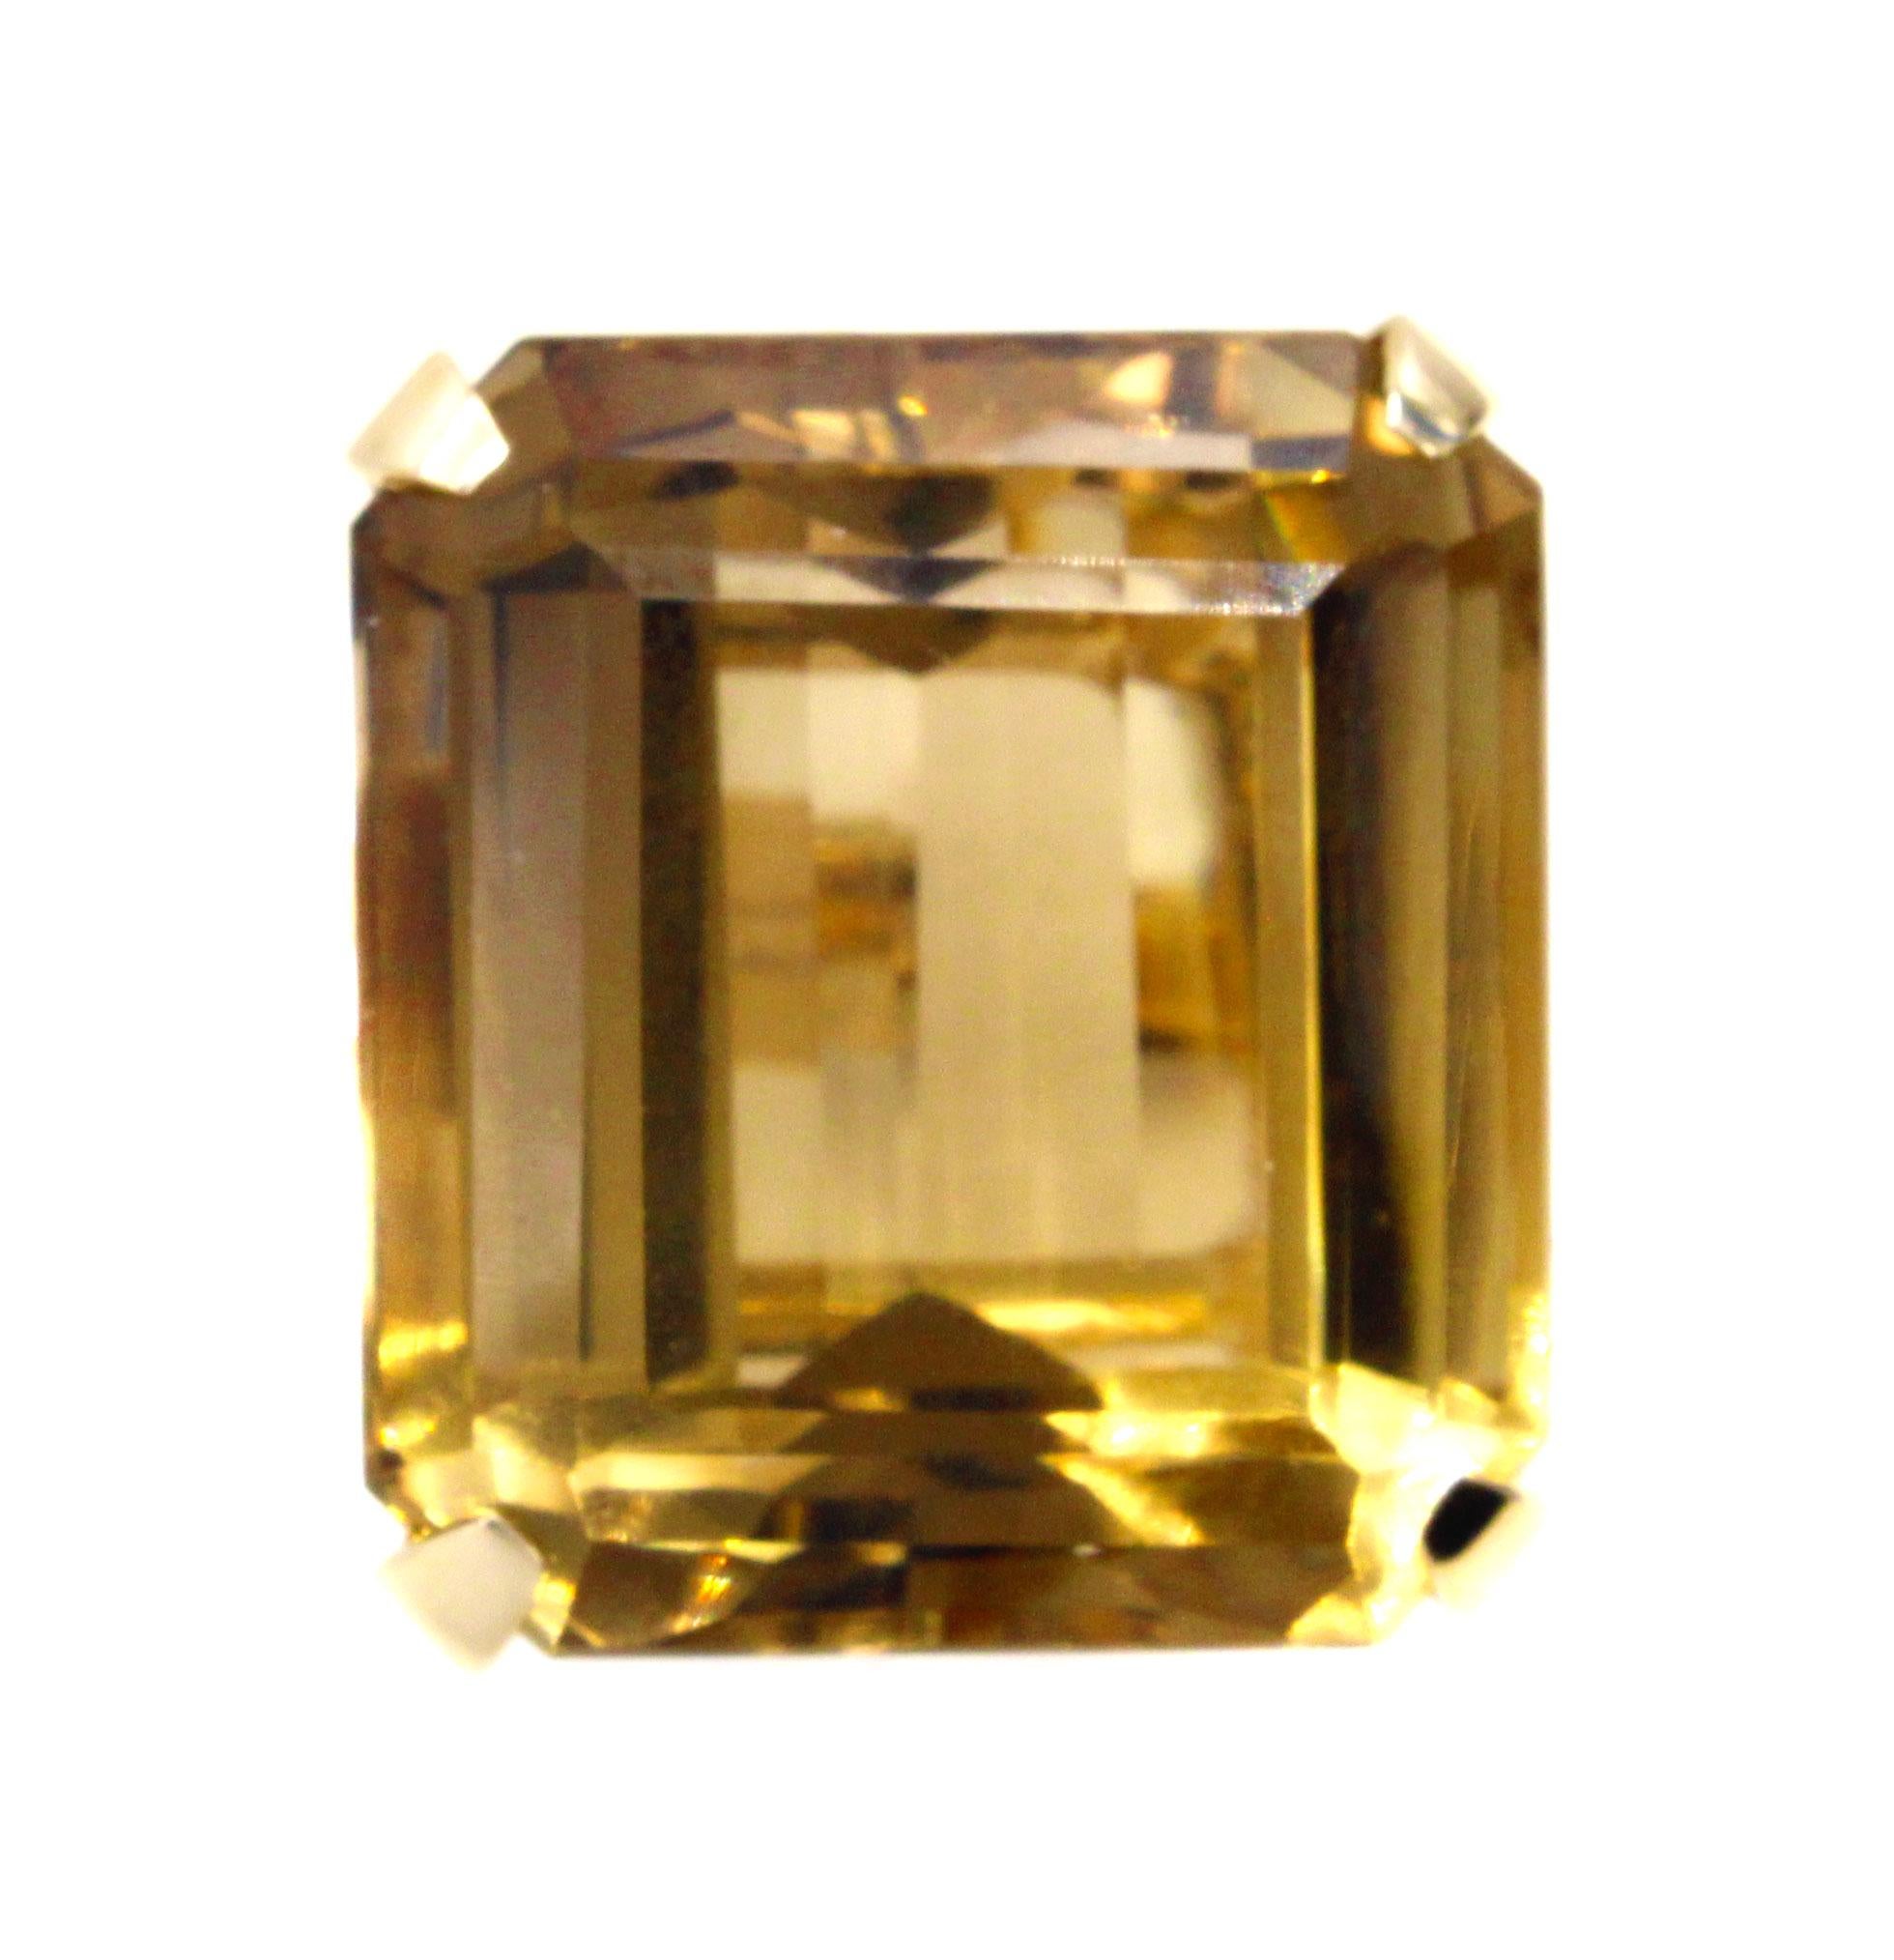 Featured in this handcrafted Retro yellow gold ring is a perfectly cut Citrine measured to weigh approximately 51 carats. The beautifully emerald cut gemstone exhibits a wonderful saturation of color and brilliance. This bold piece of jewelry is